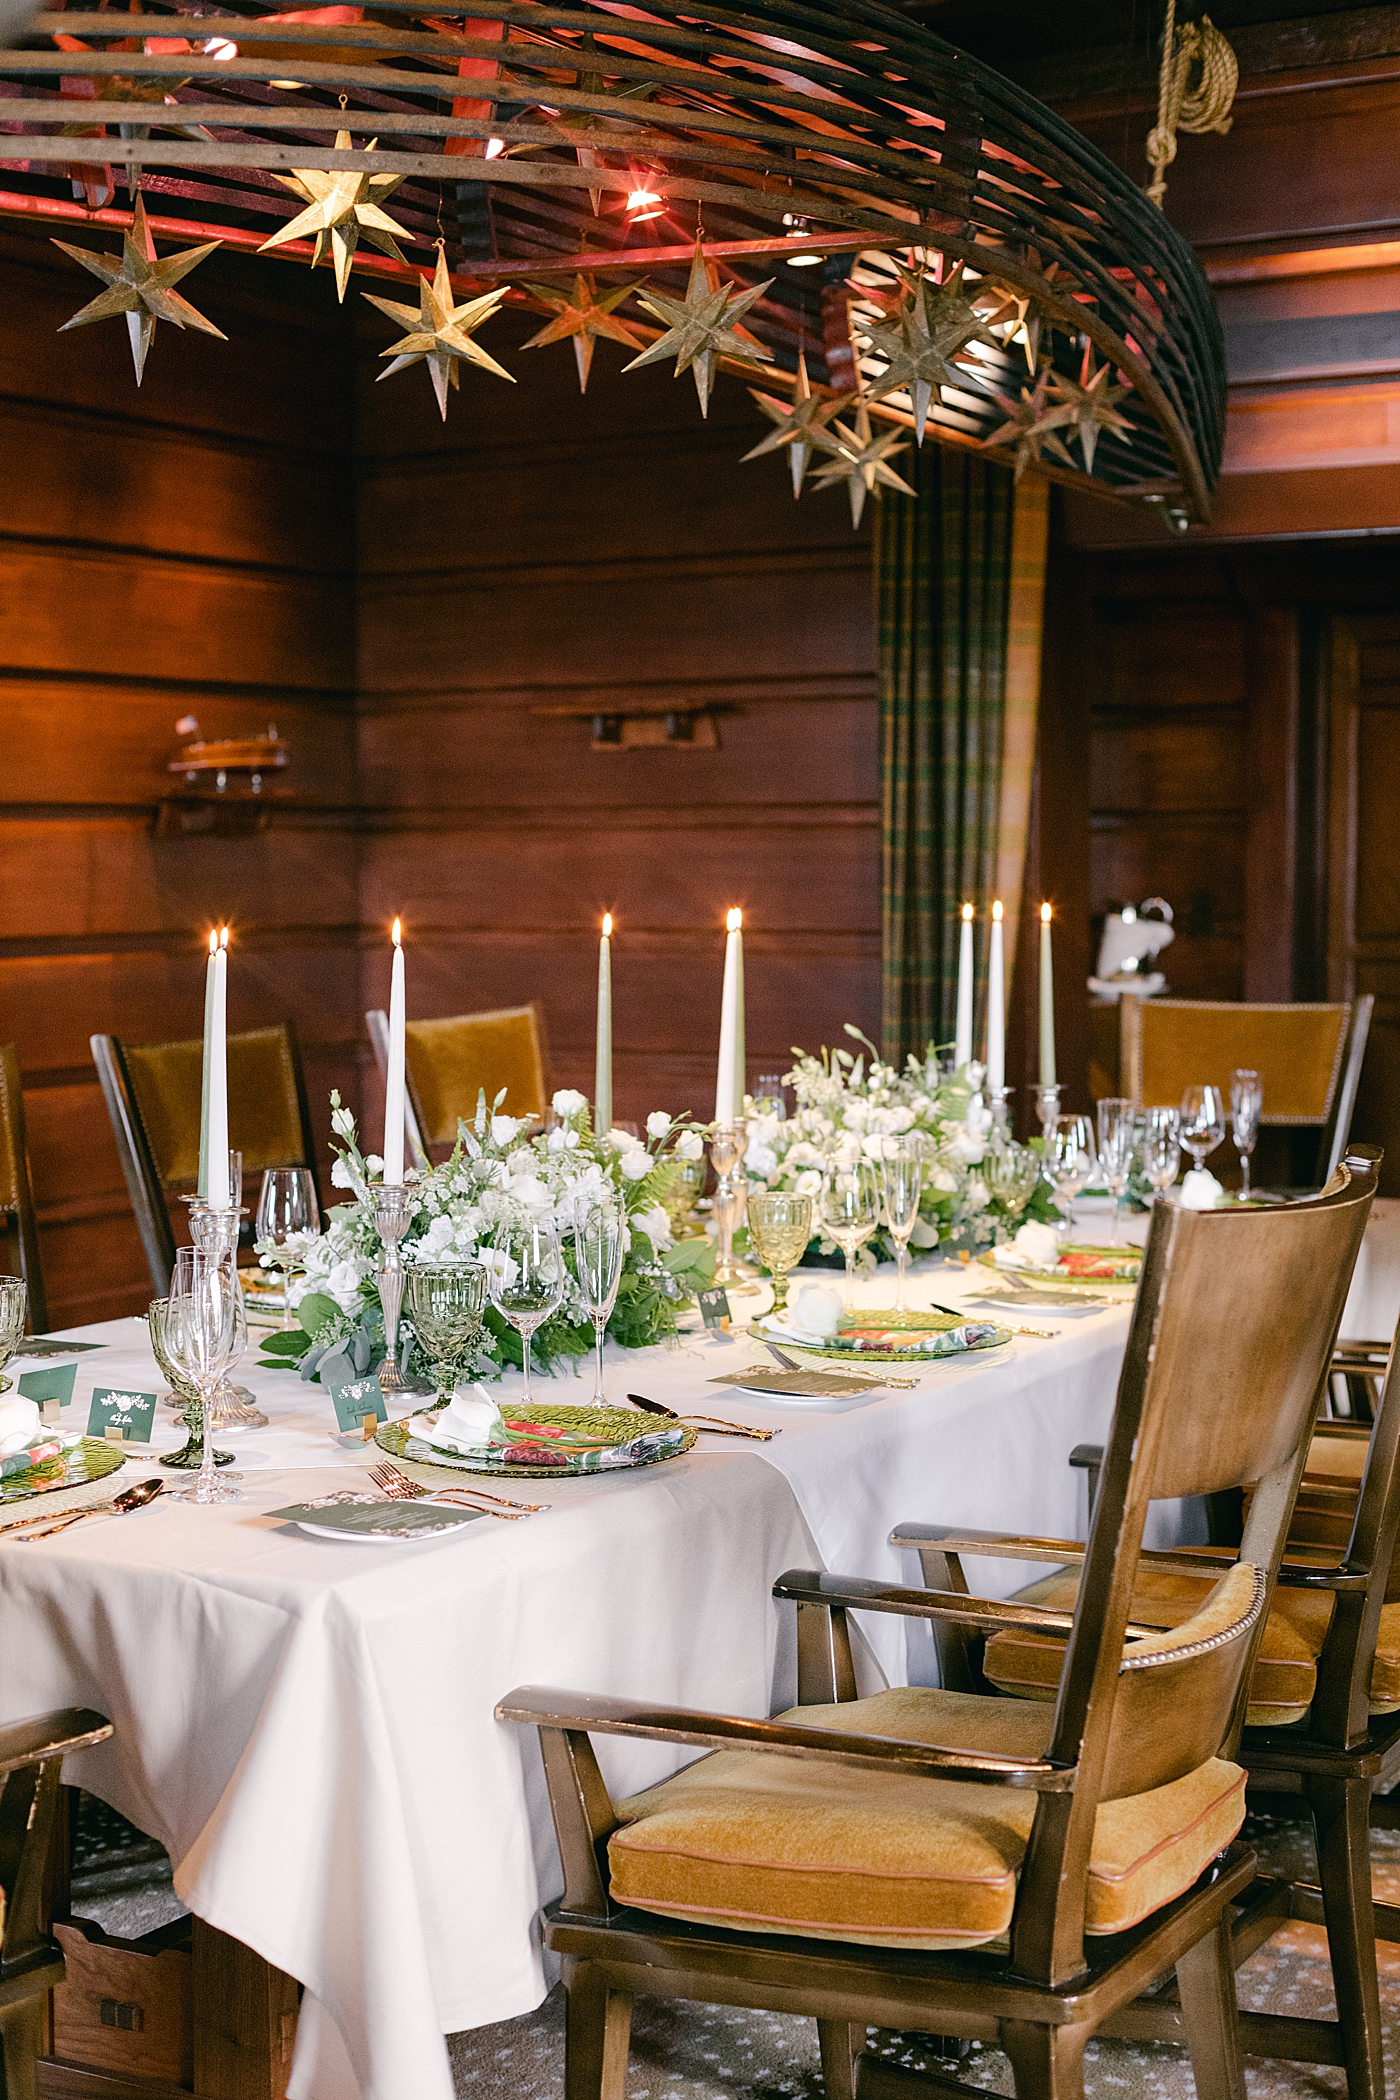 Reception table with candles and flowers during Lake Placid Lodge Wedding | Image by Hope Helmuth Photography